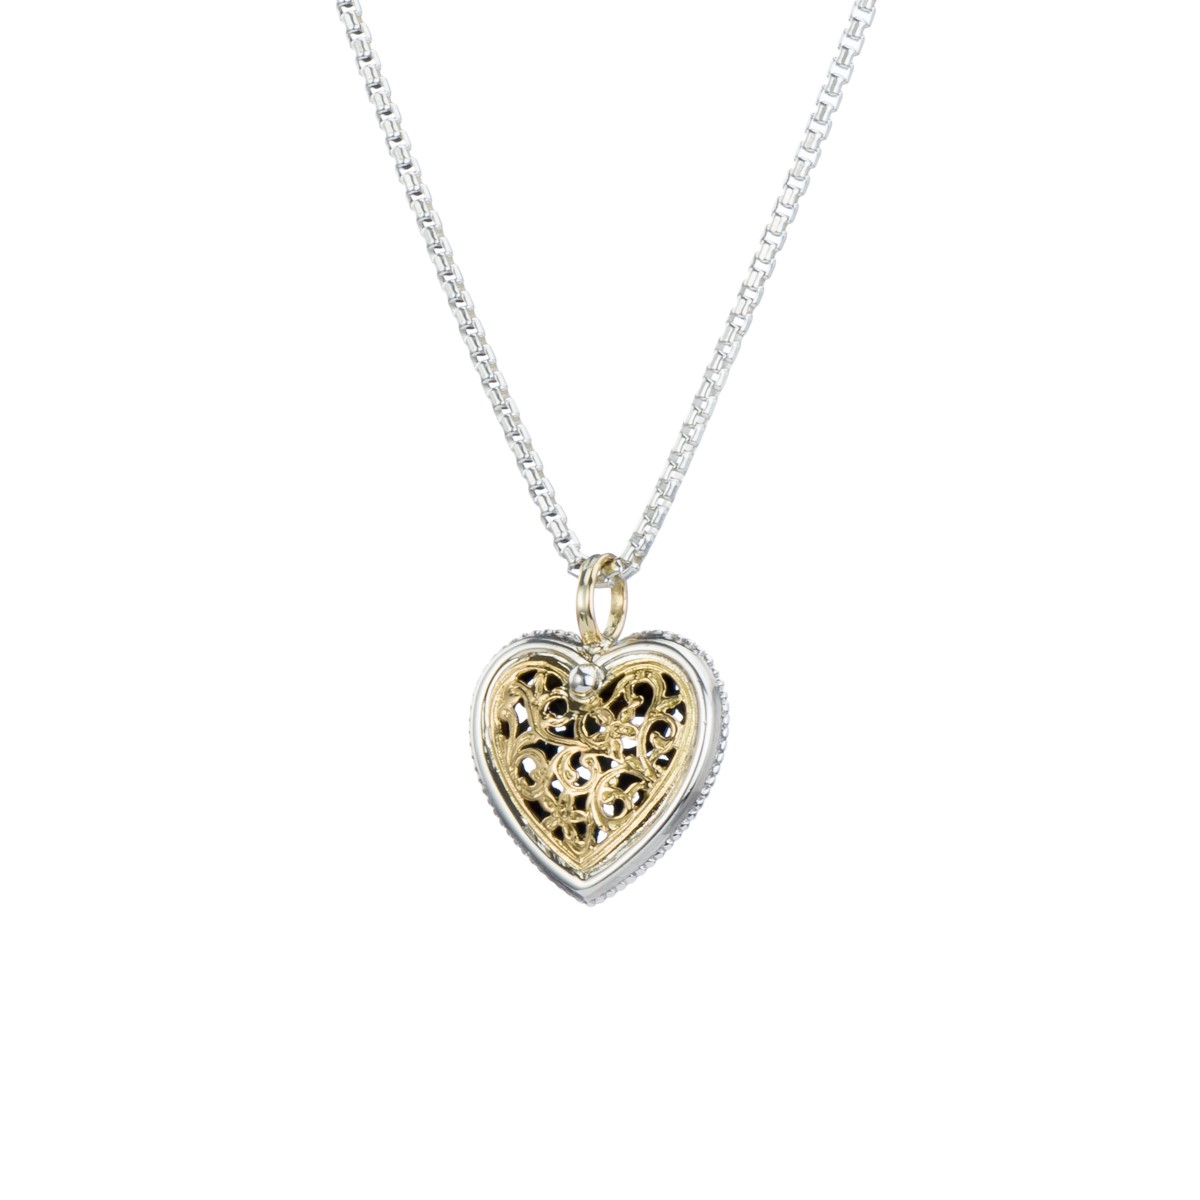 Garden Shadows Heart Pendant in 18K Gold and Sterling Silver